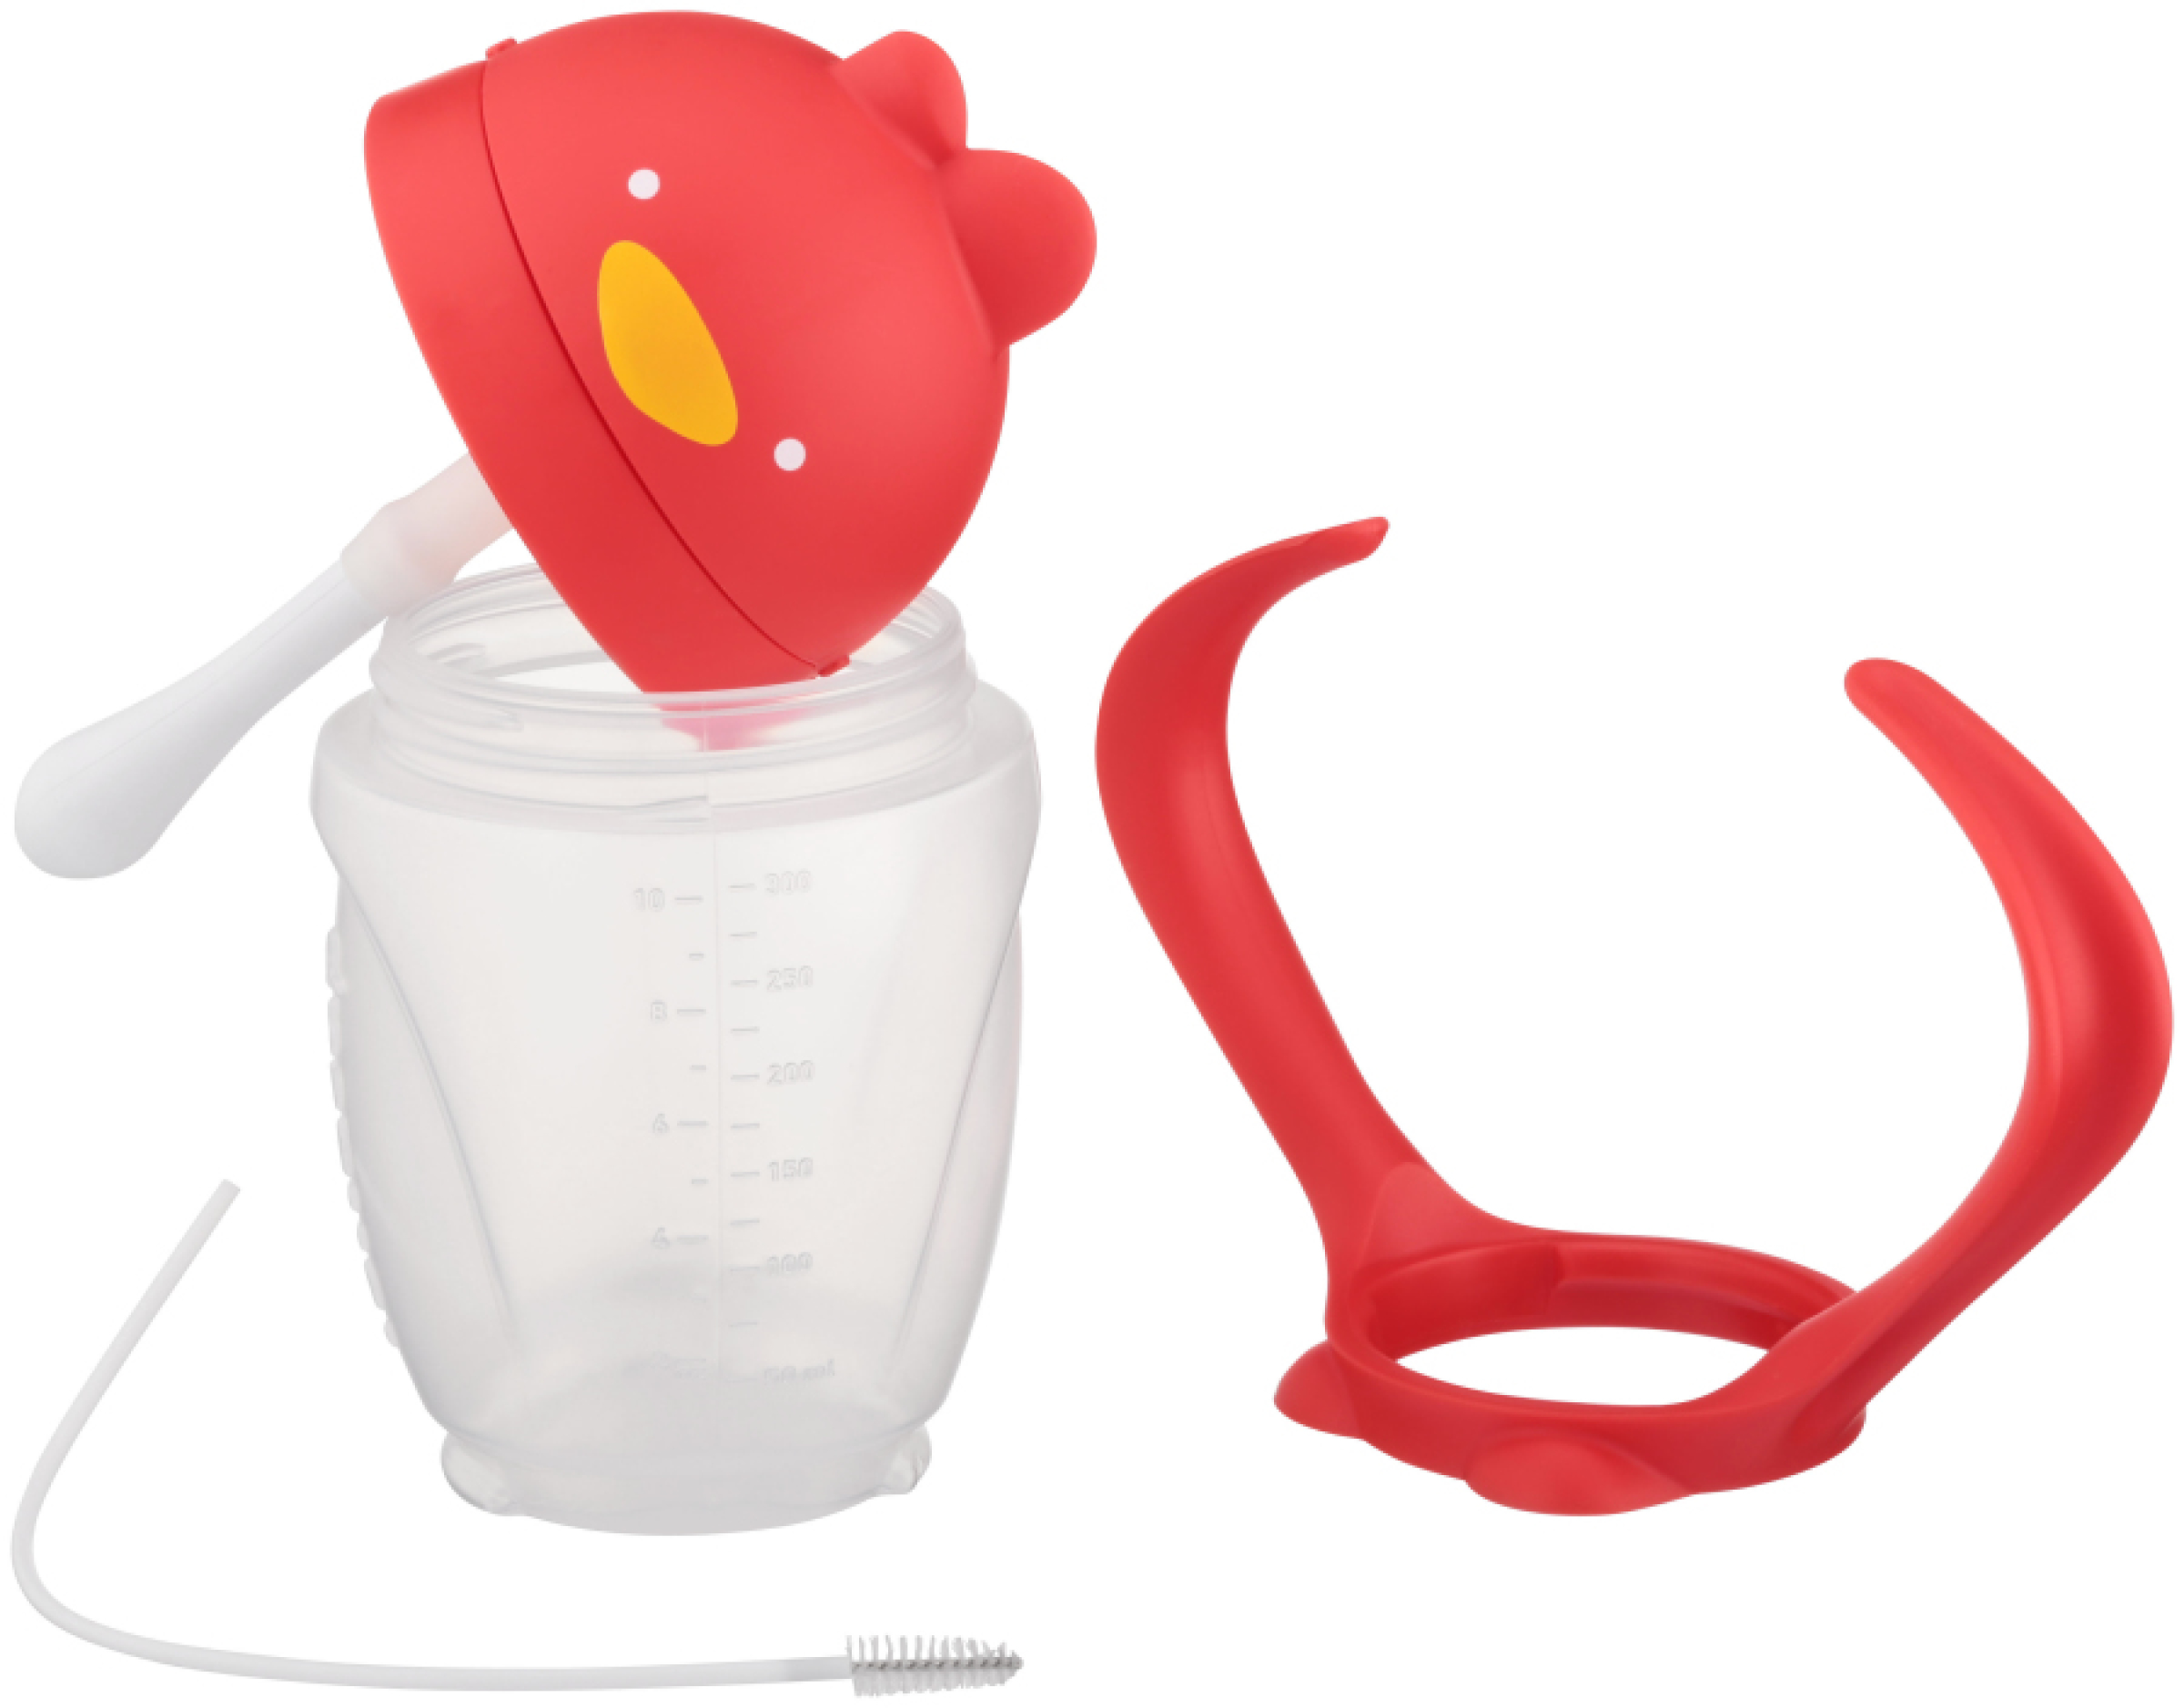 Lollacup Straw Sippy Cup – lollaland